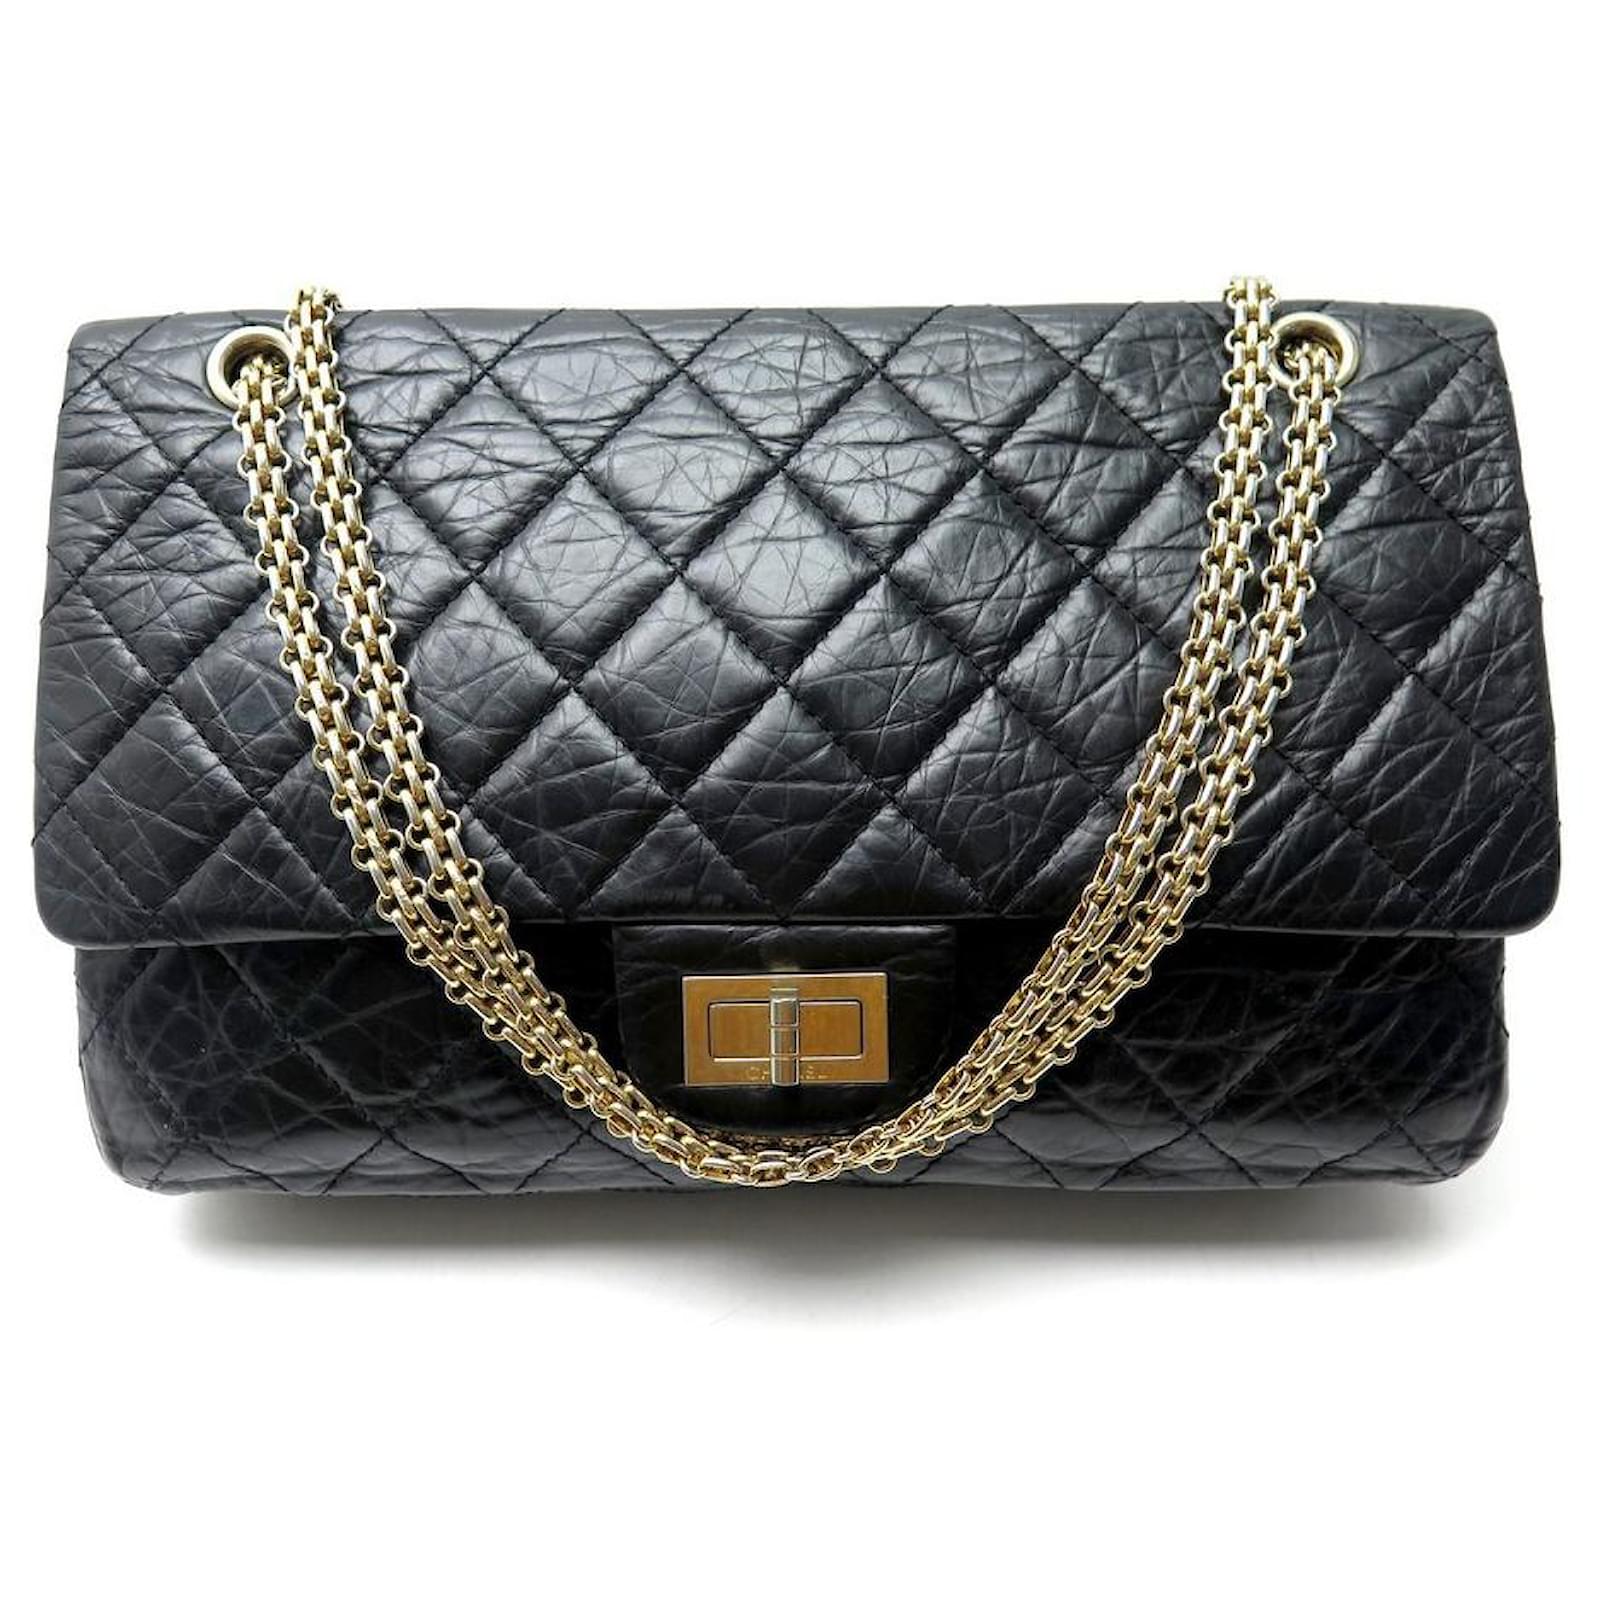 CHANEL LARGE HANDBAG 2.55 JUMBO A37587 BLACK QUILTED LEATHER BIRTHDAY ...